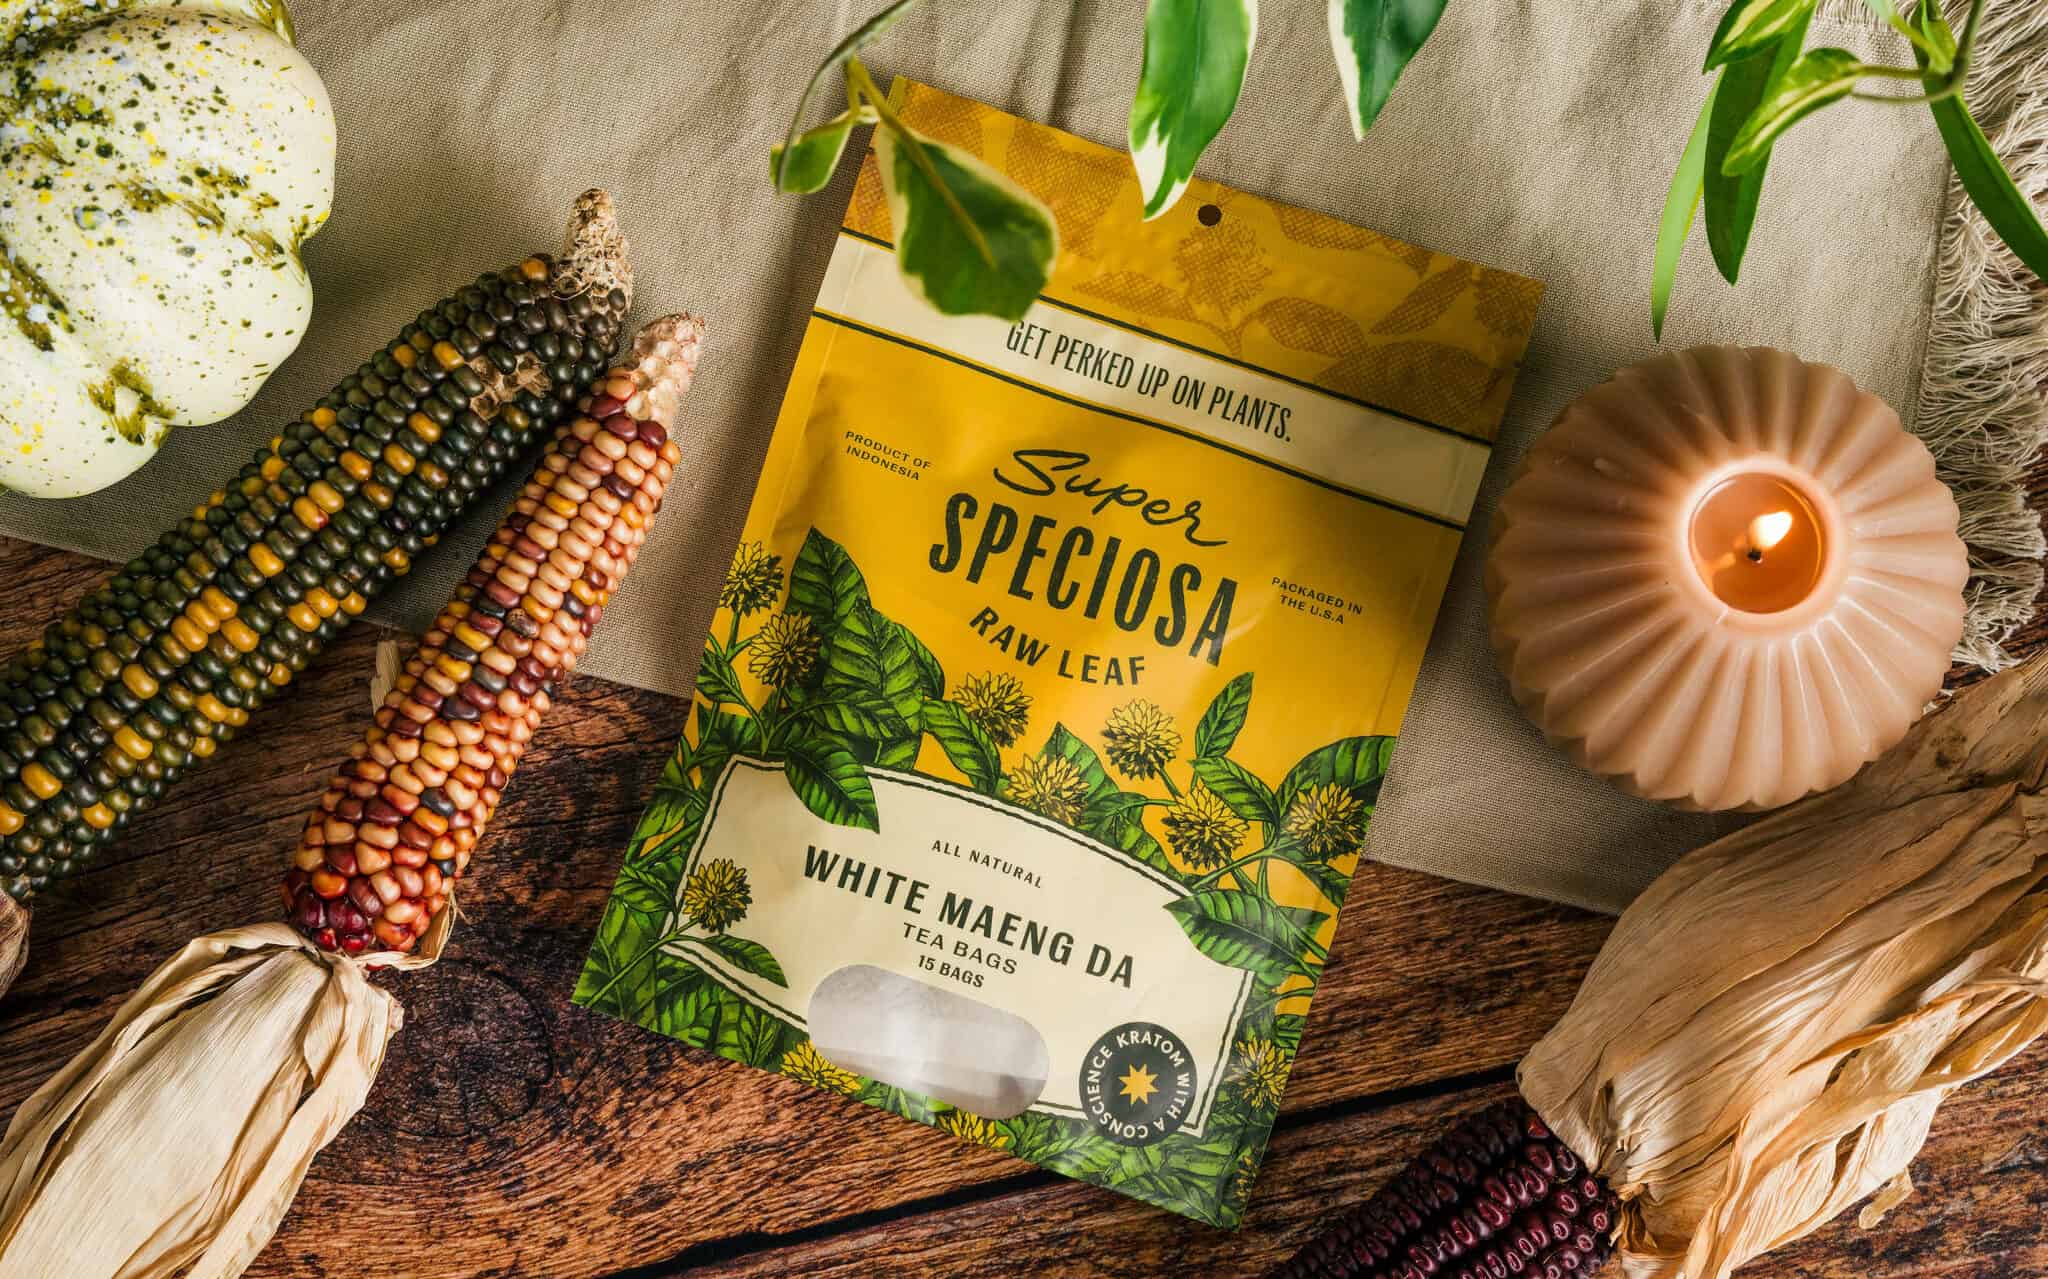 Super Speciosa's White Maeng Da Kratom Tea Bags staged in an autumn setting. White Maeng Da is one of the best kratom strains to buy in 2023.